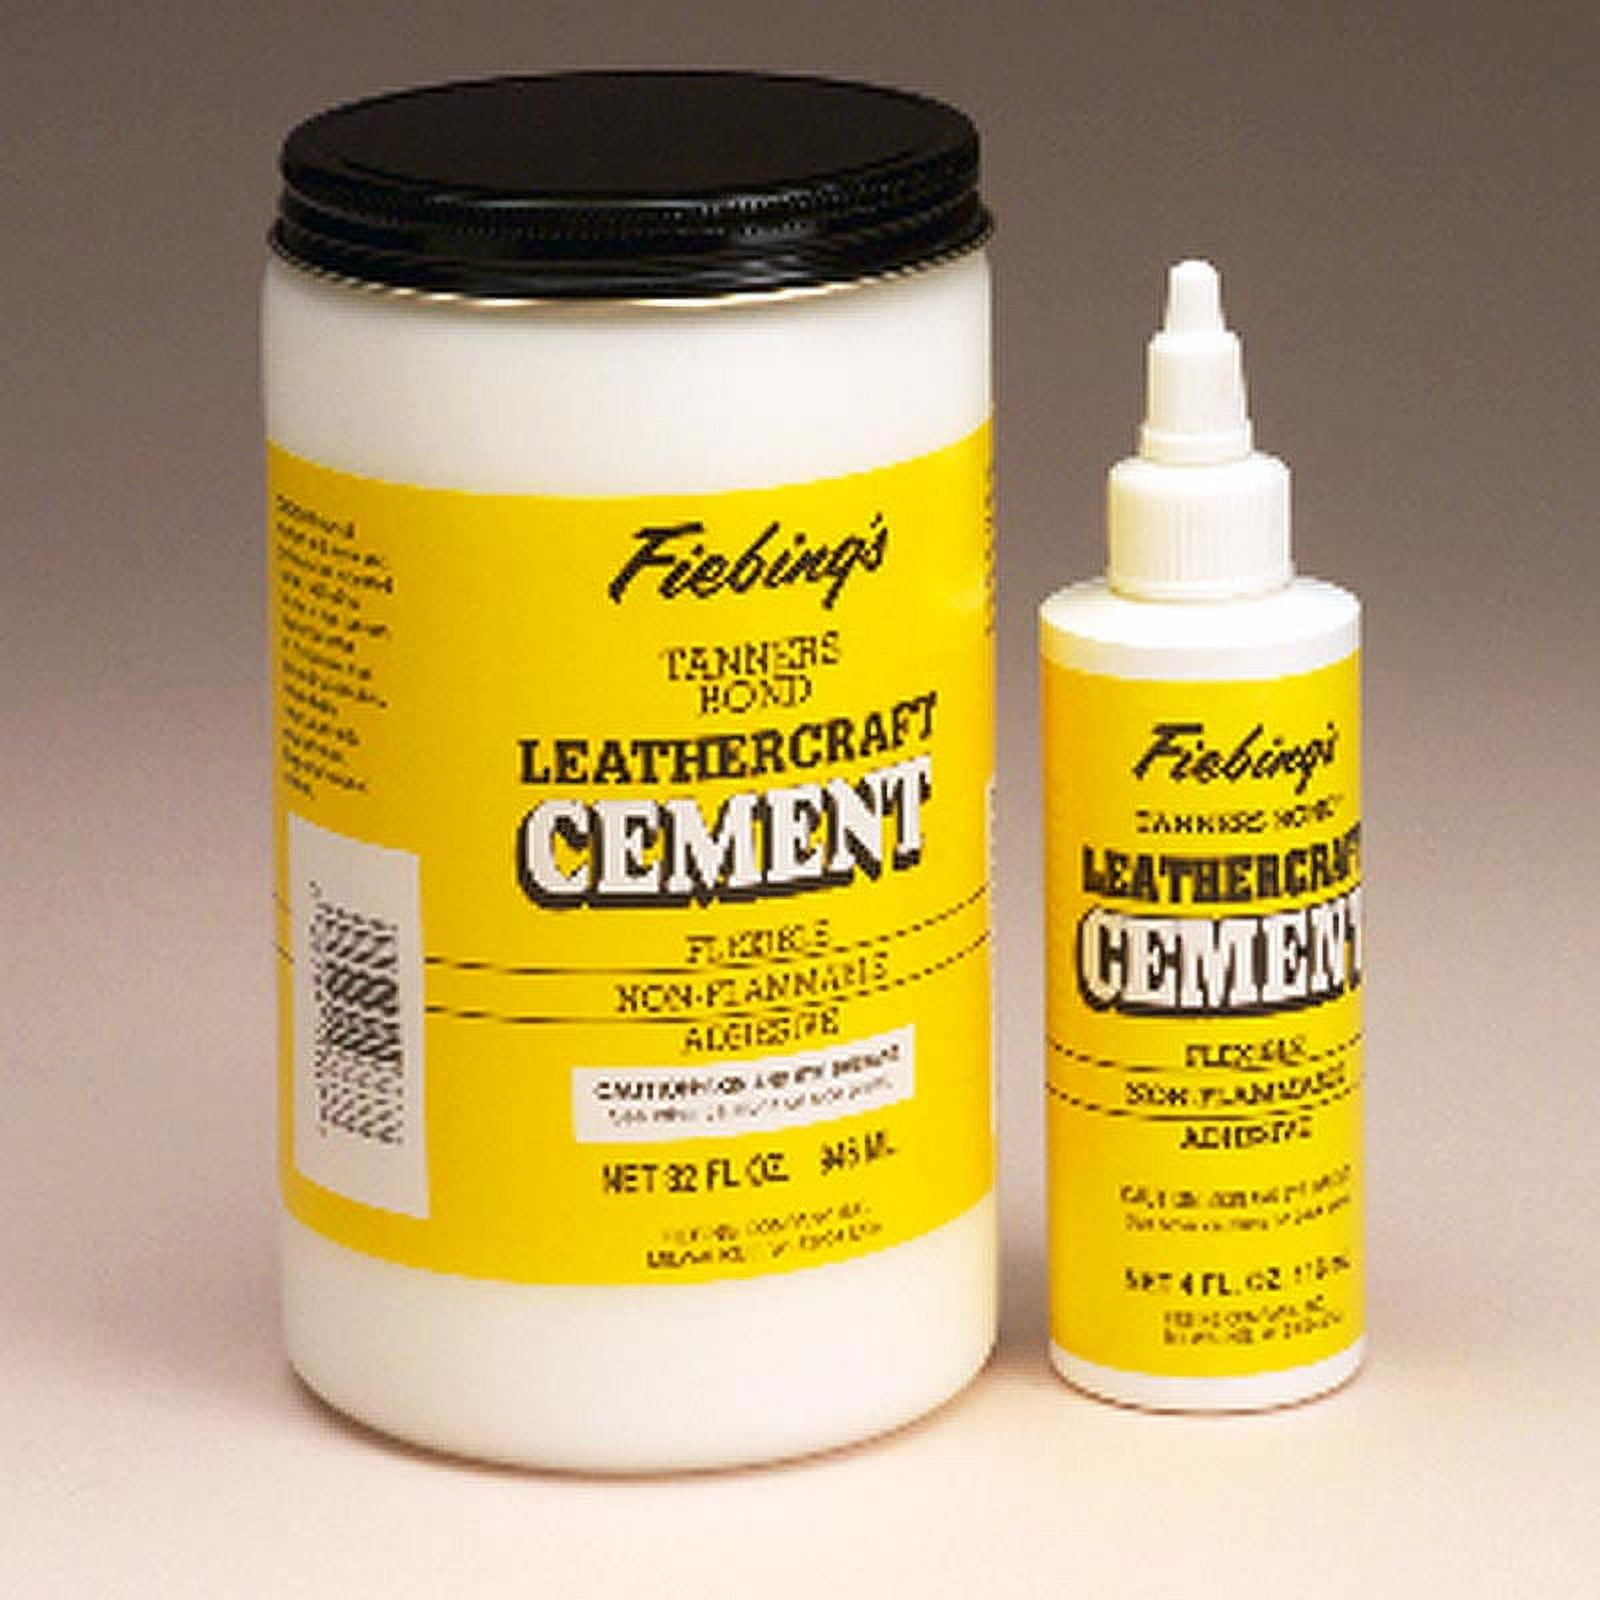 Leather Craft Cement